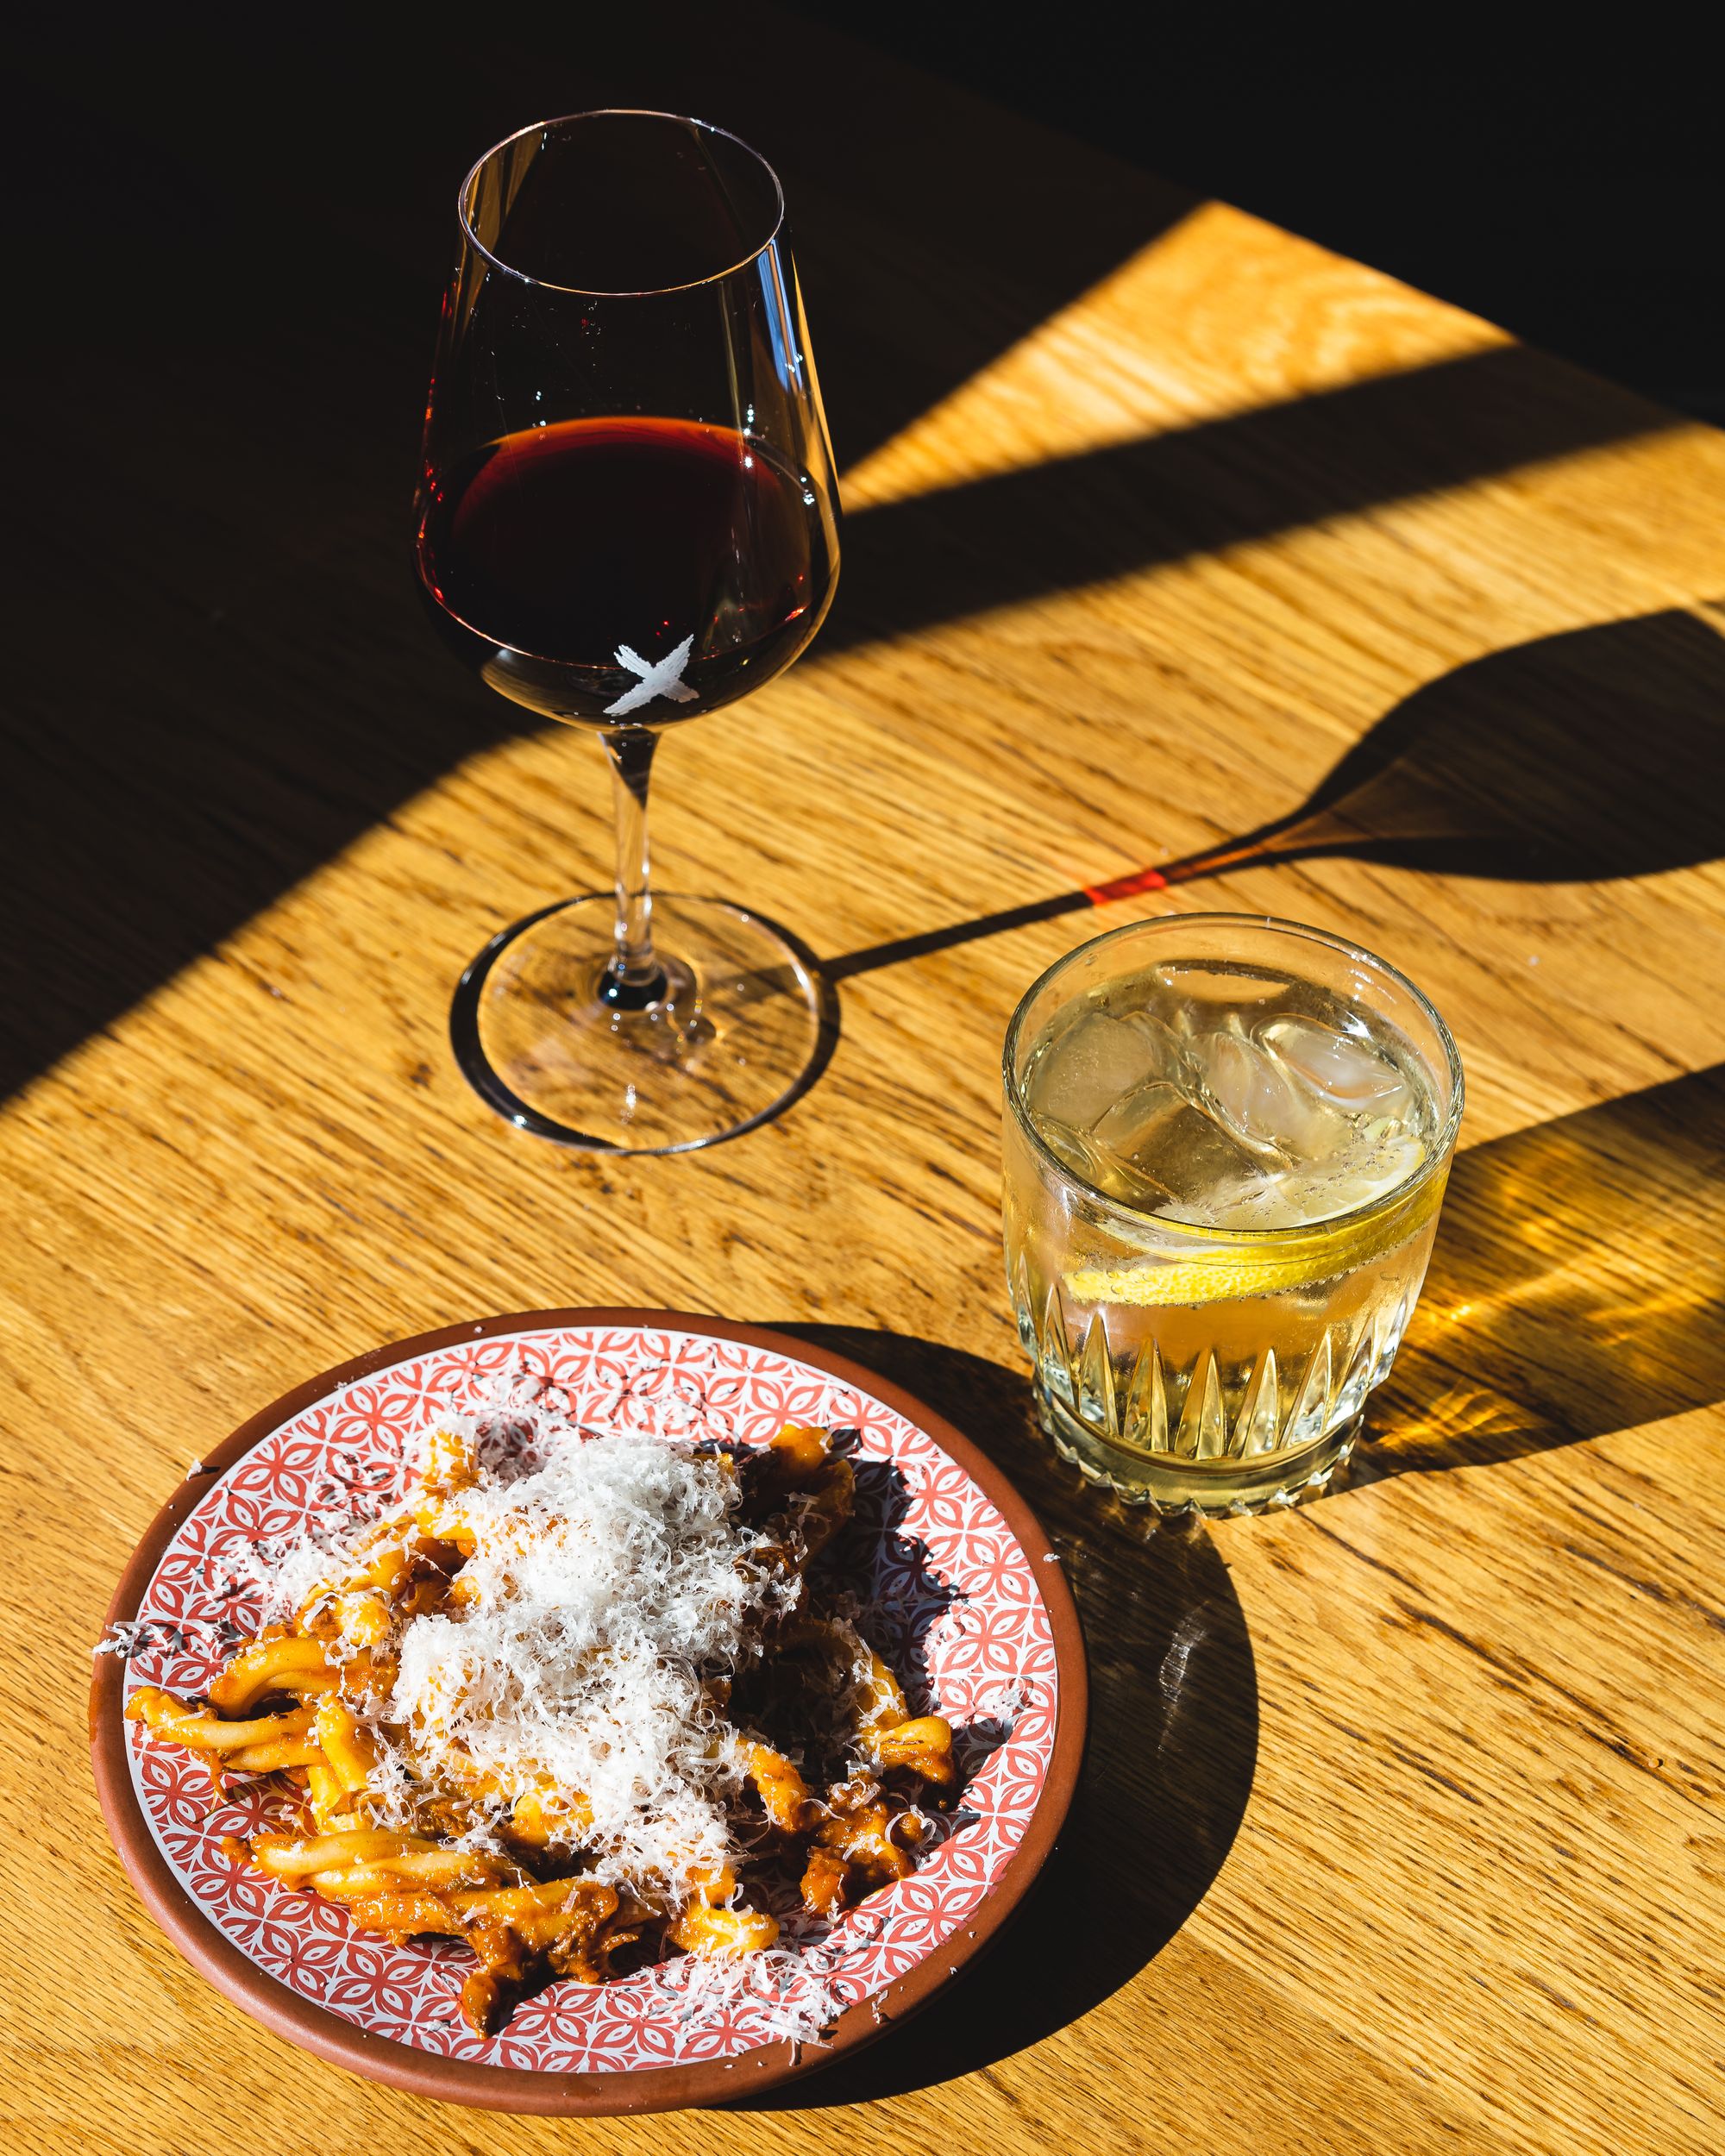 Harshly lit shot of pasta, a mocktail class and wine glass with long casted shadows from the harsh light